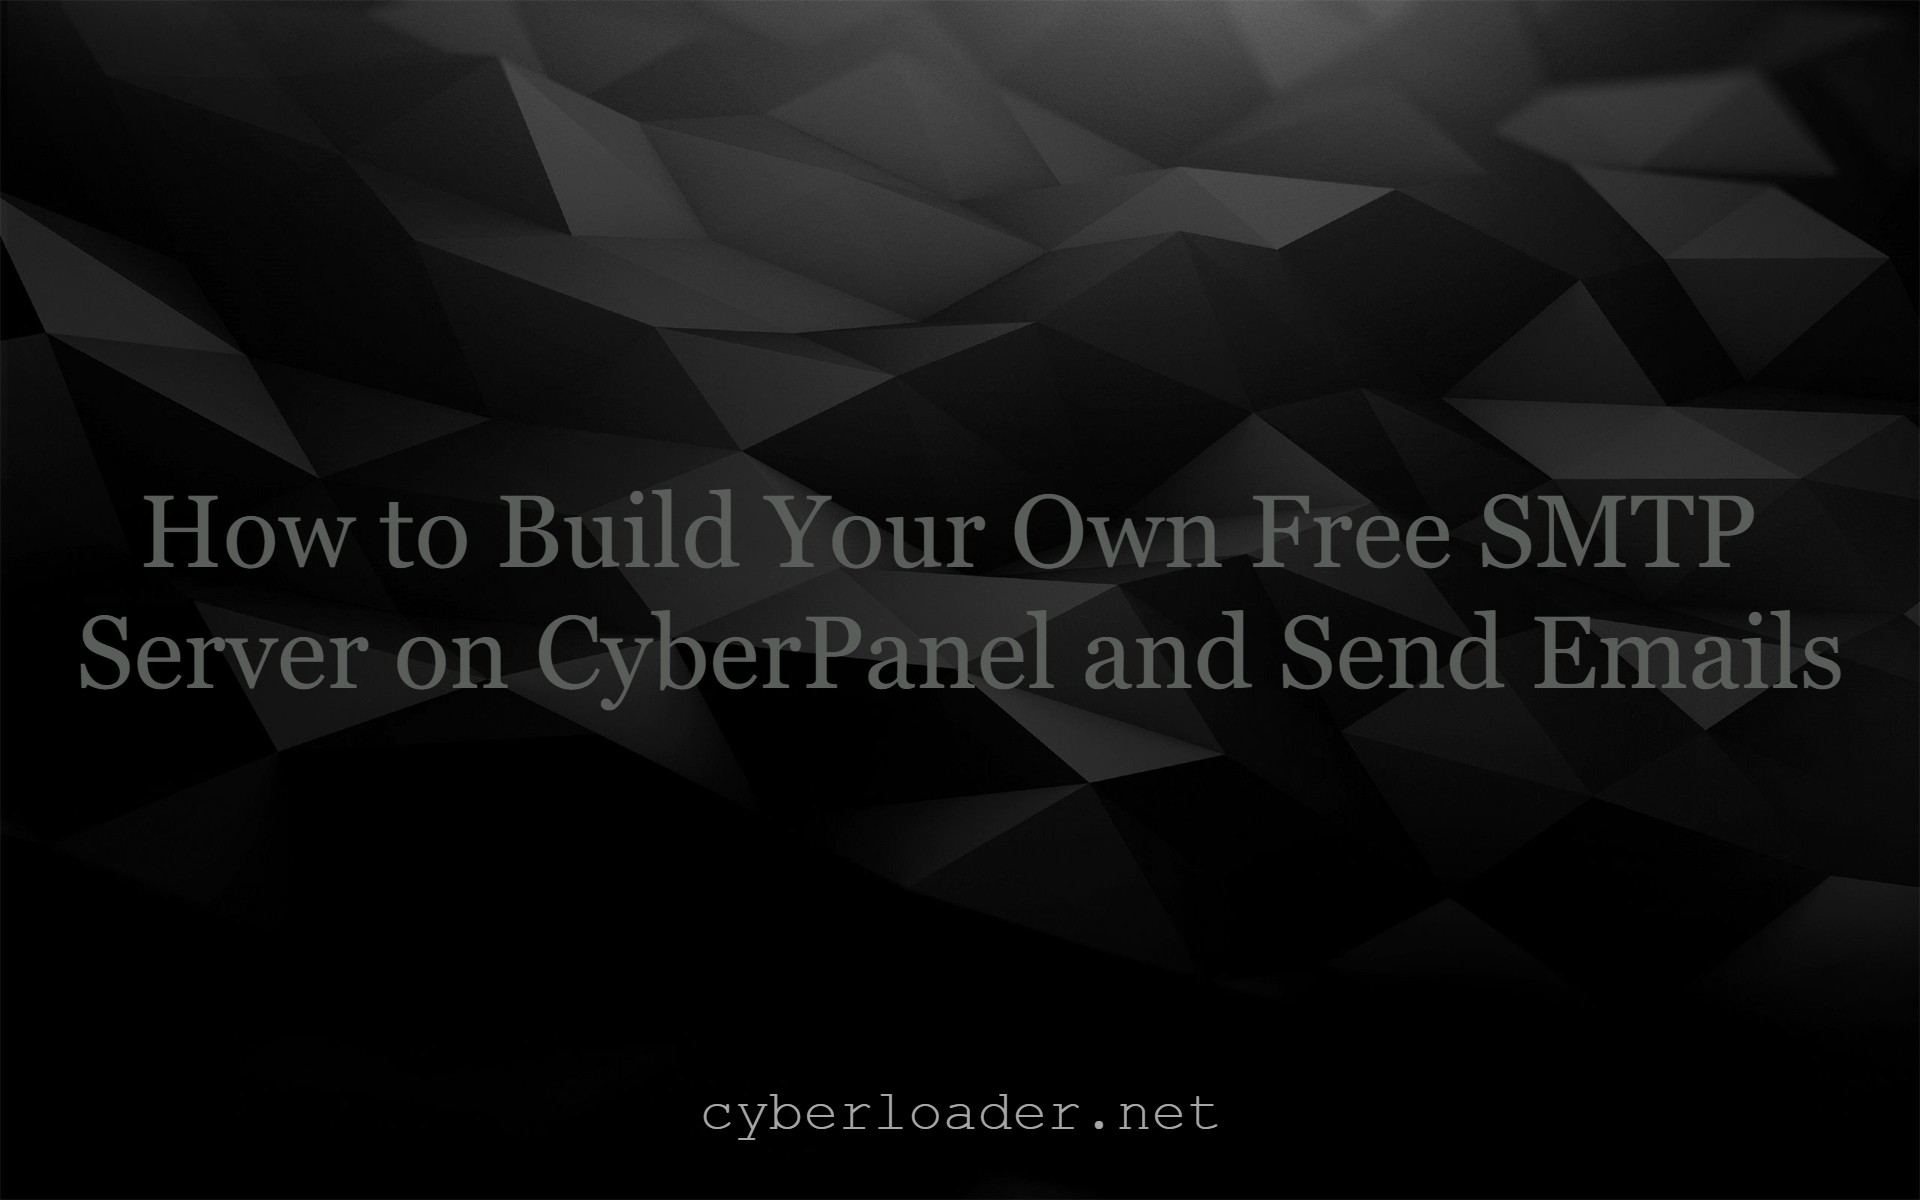 How to Build Your Own Free SMTP Server on CyberPanel and Send Emails